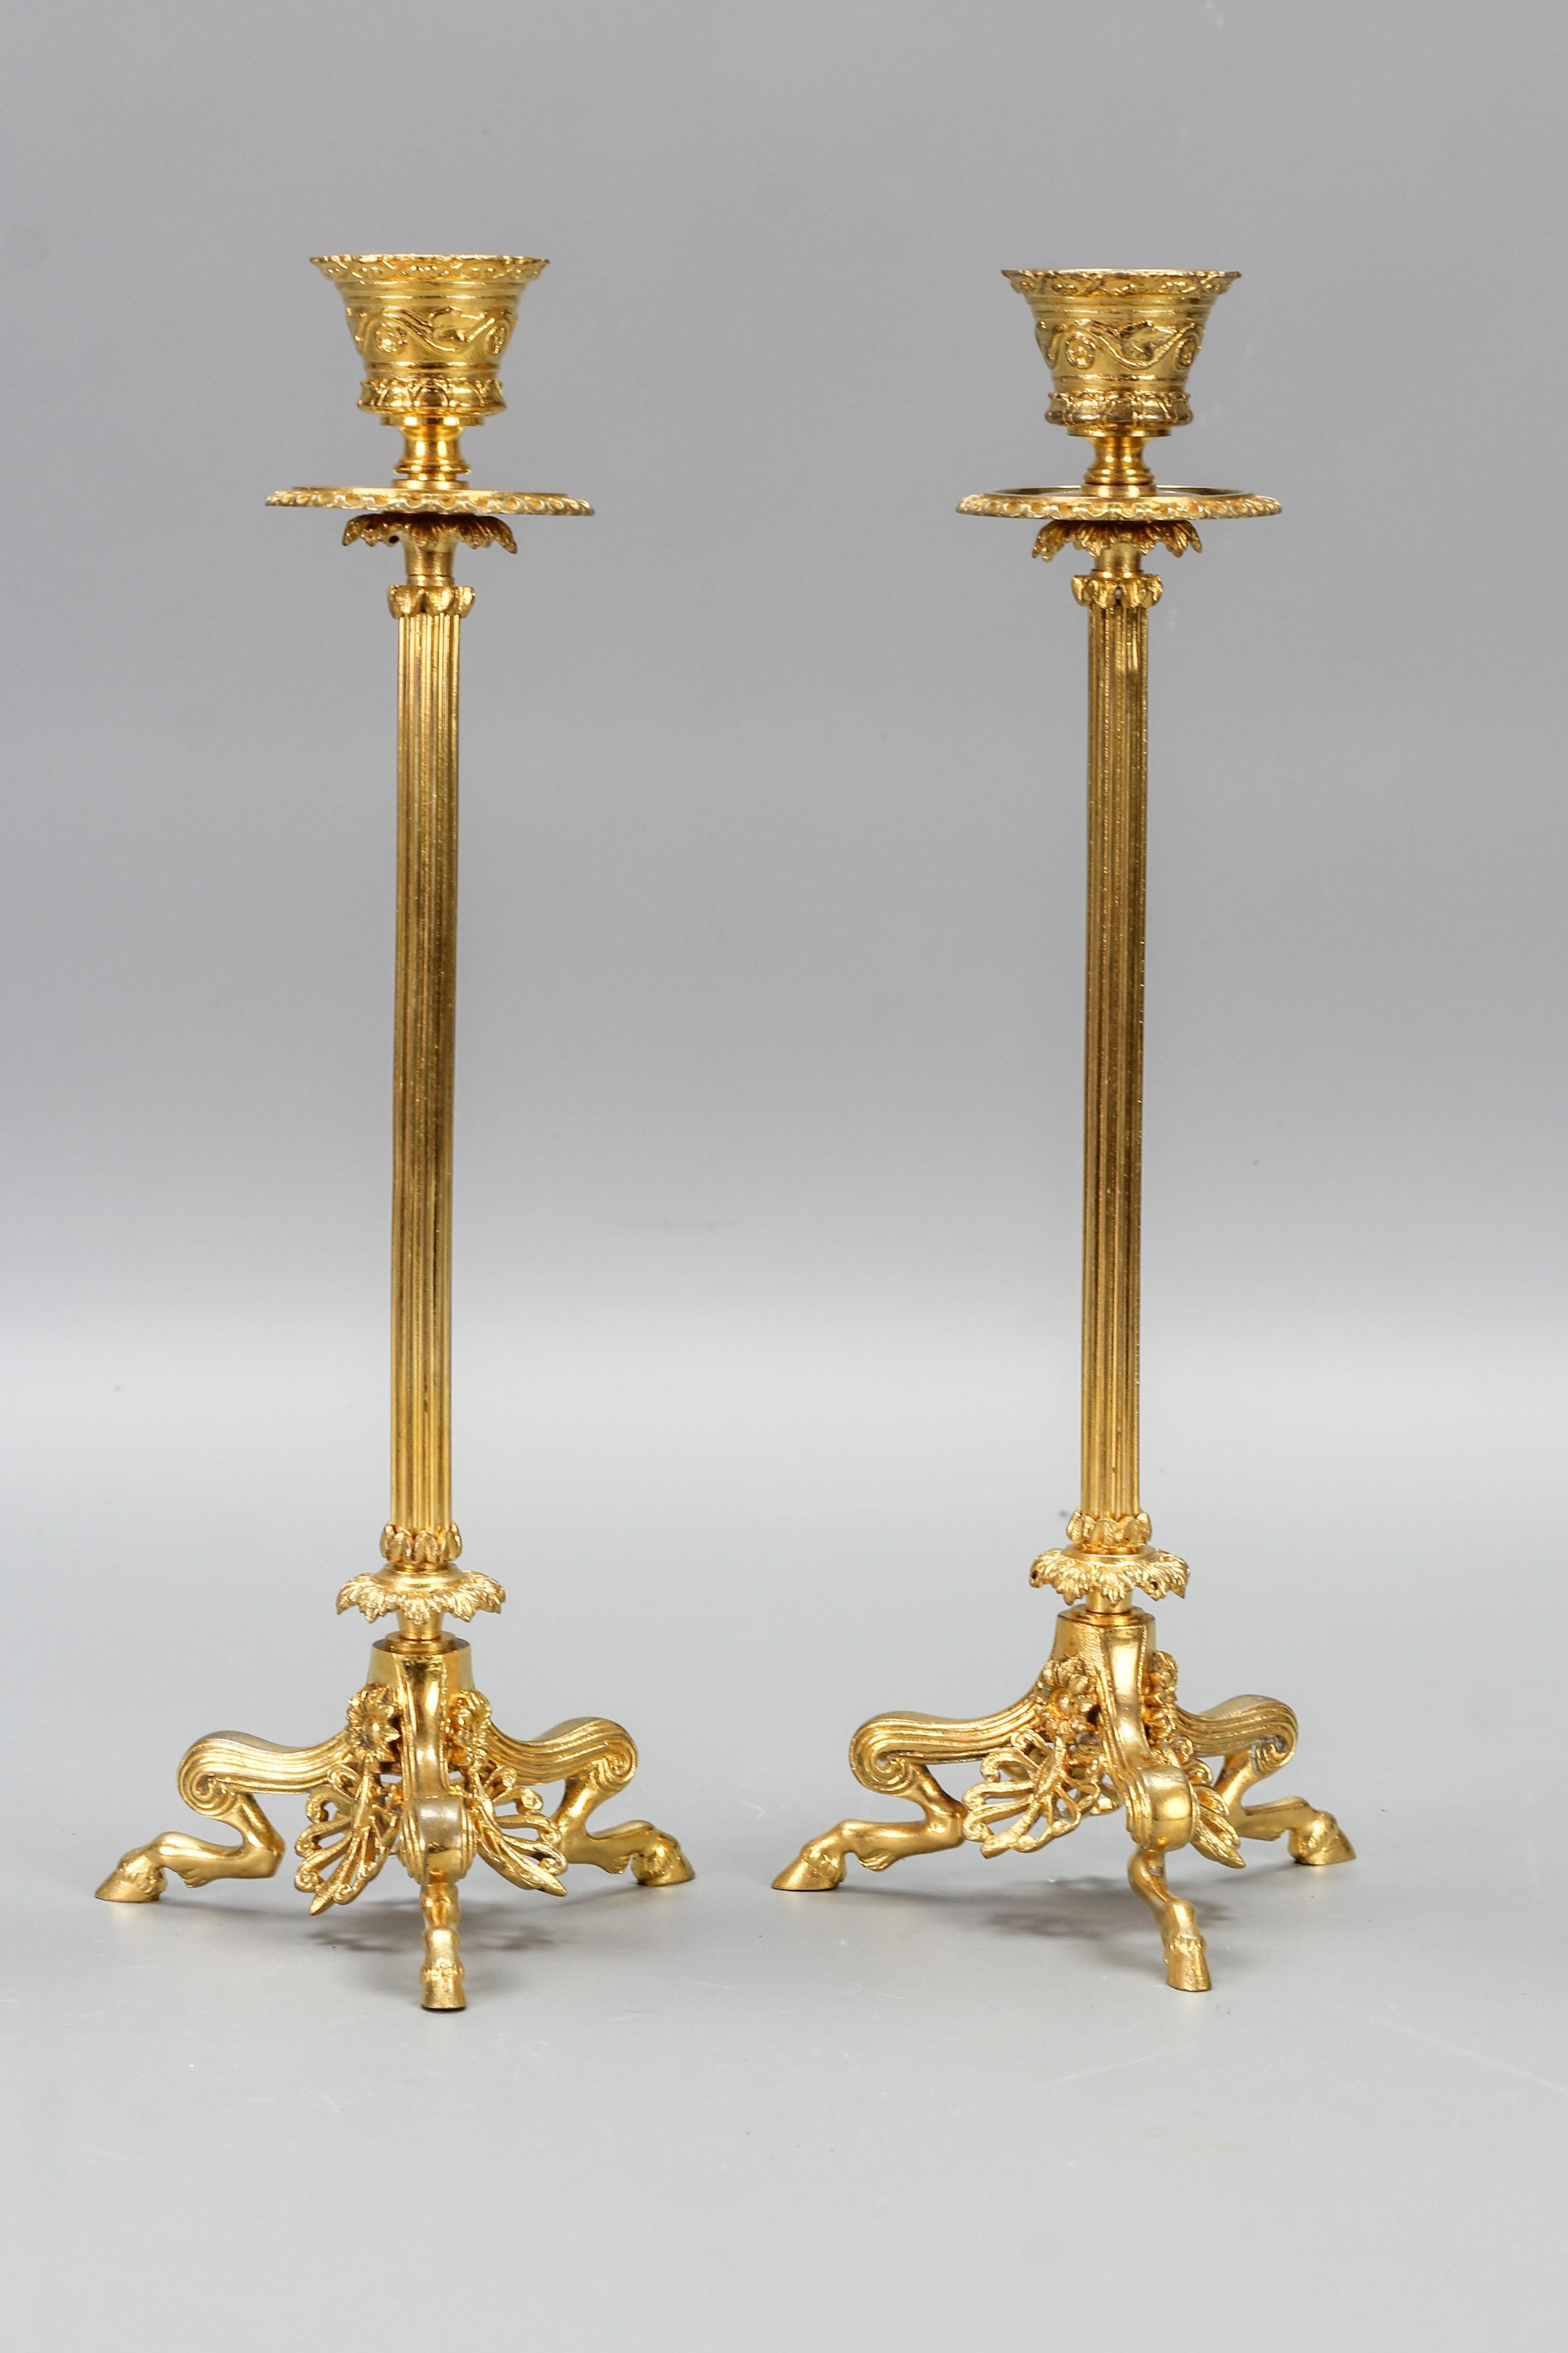 Pair of French Empire Style Gilt Bronze Candlesticks on Hoofed Faun Feet In Good Condition For Sale In Barntrup, DE